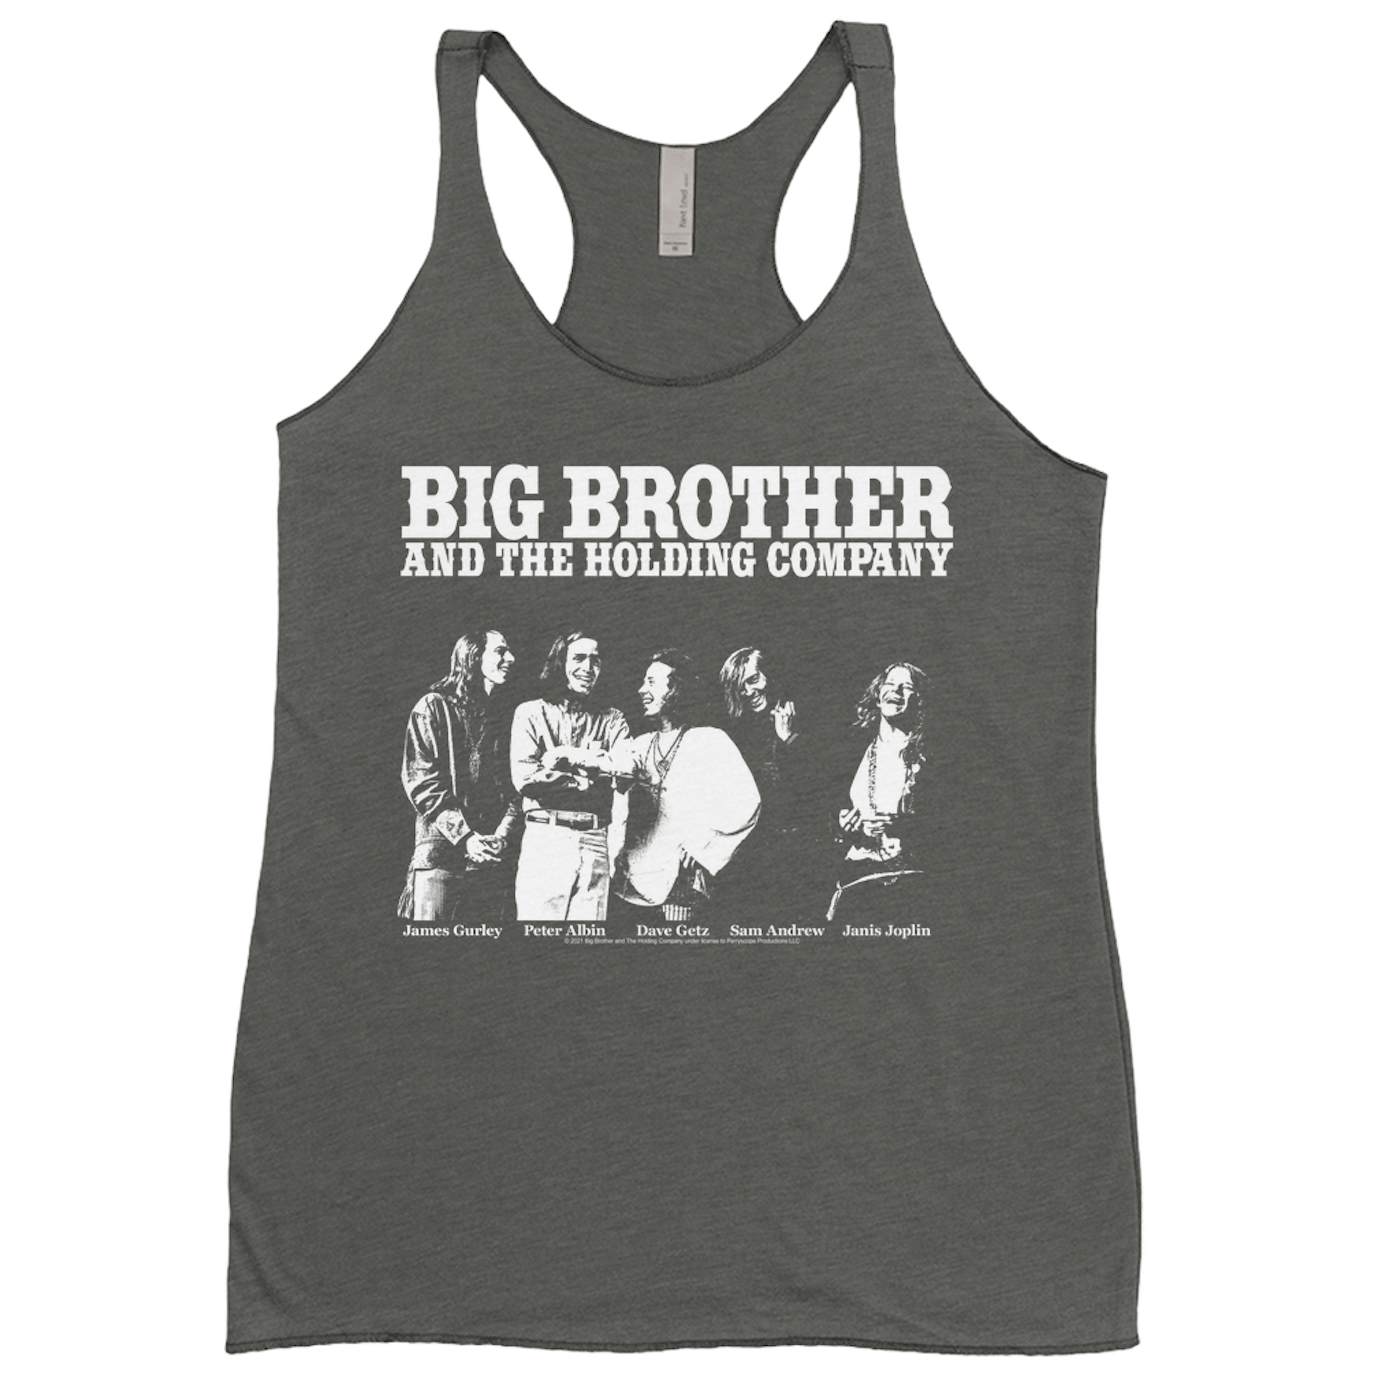 Big Brother & The Holding Company Big Brother and The Holding Co. Ladies' Tank Top | Featuring Janis Joplin Black and White Photo Big Brother and The Holding Co. Shirt (Merchbar Exclusive)